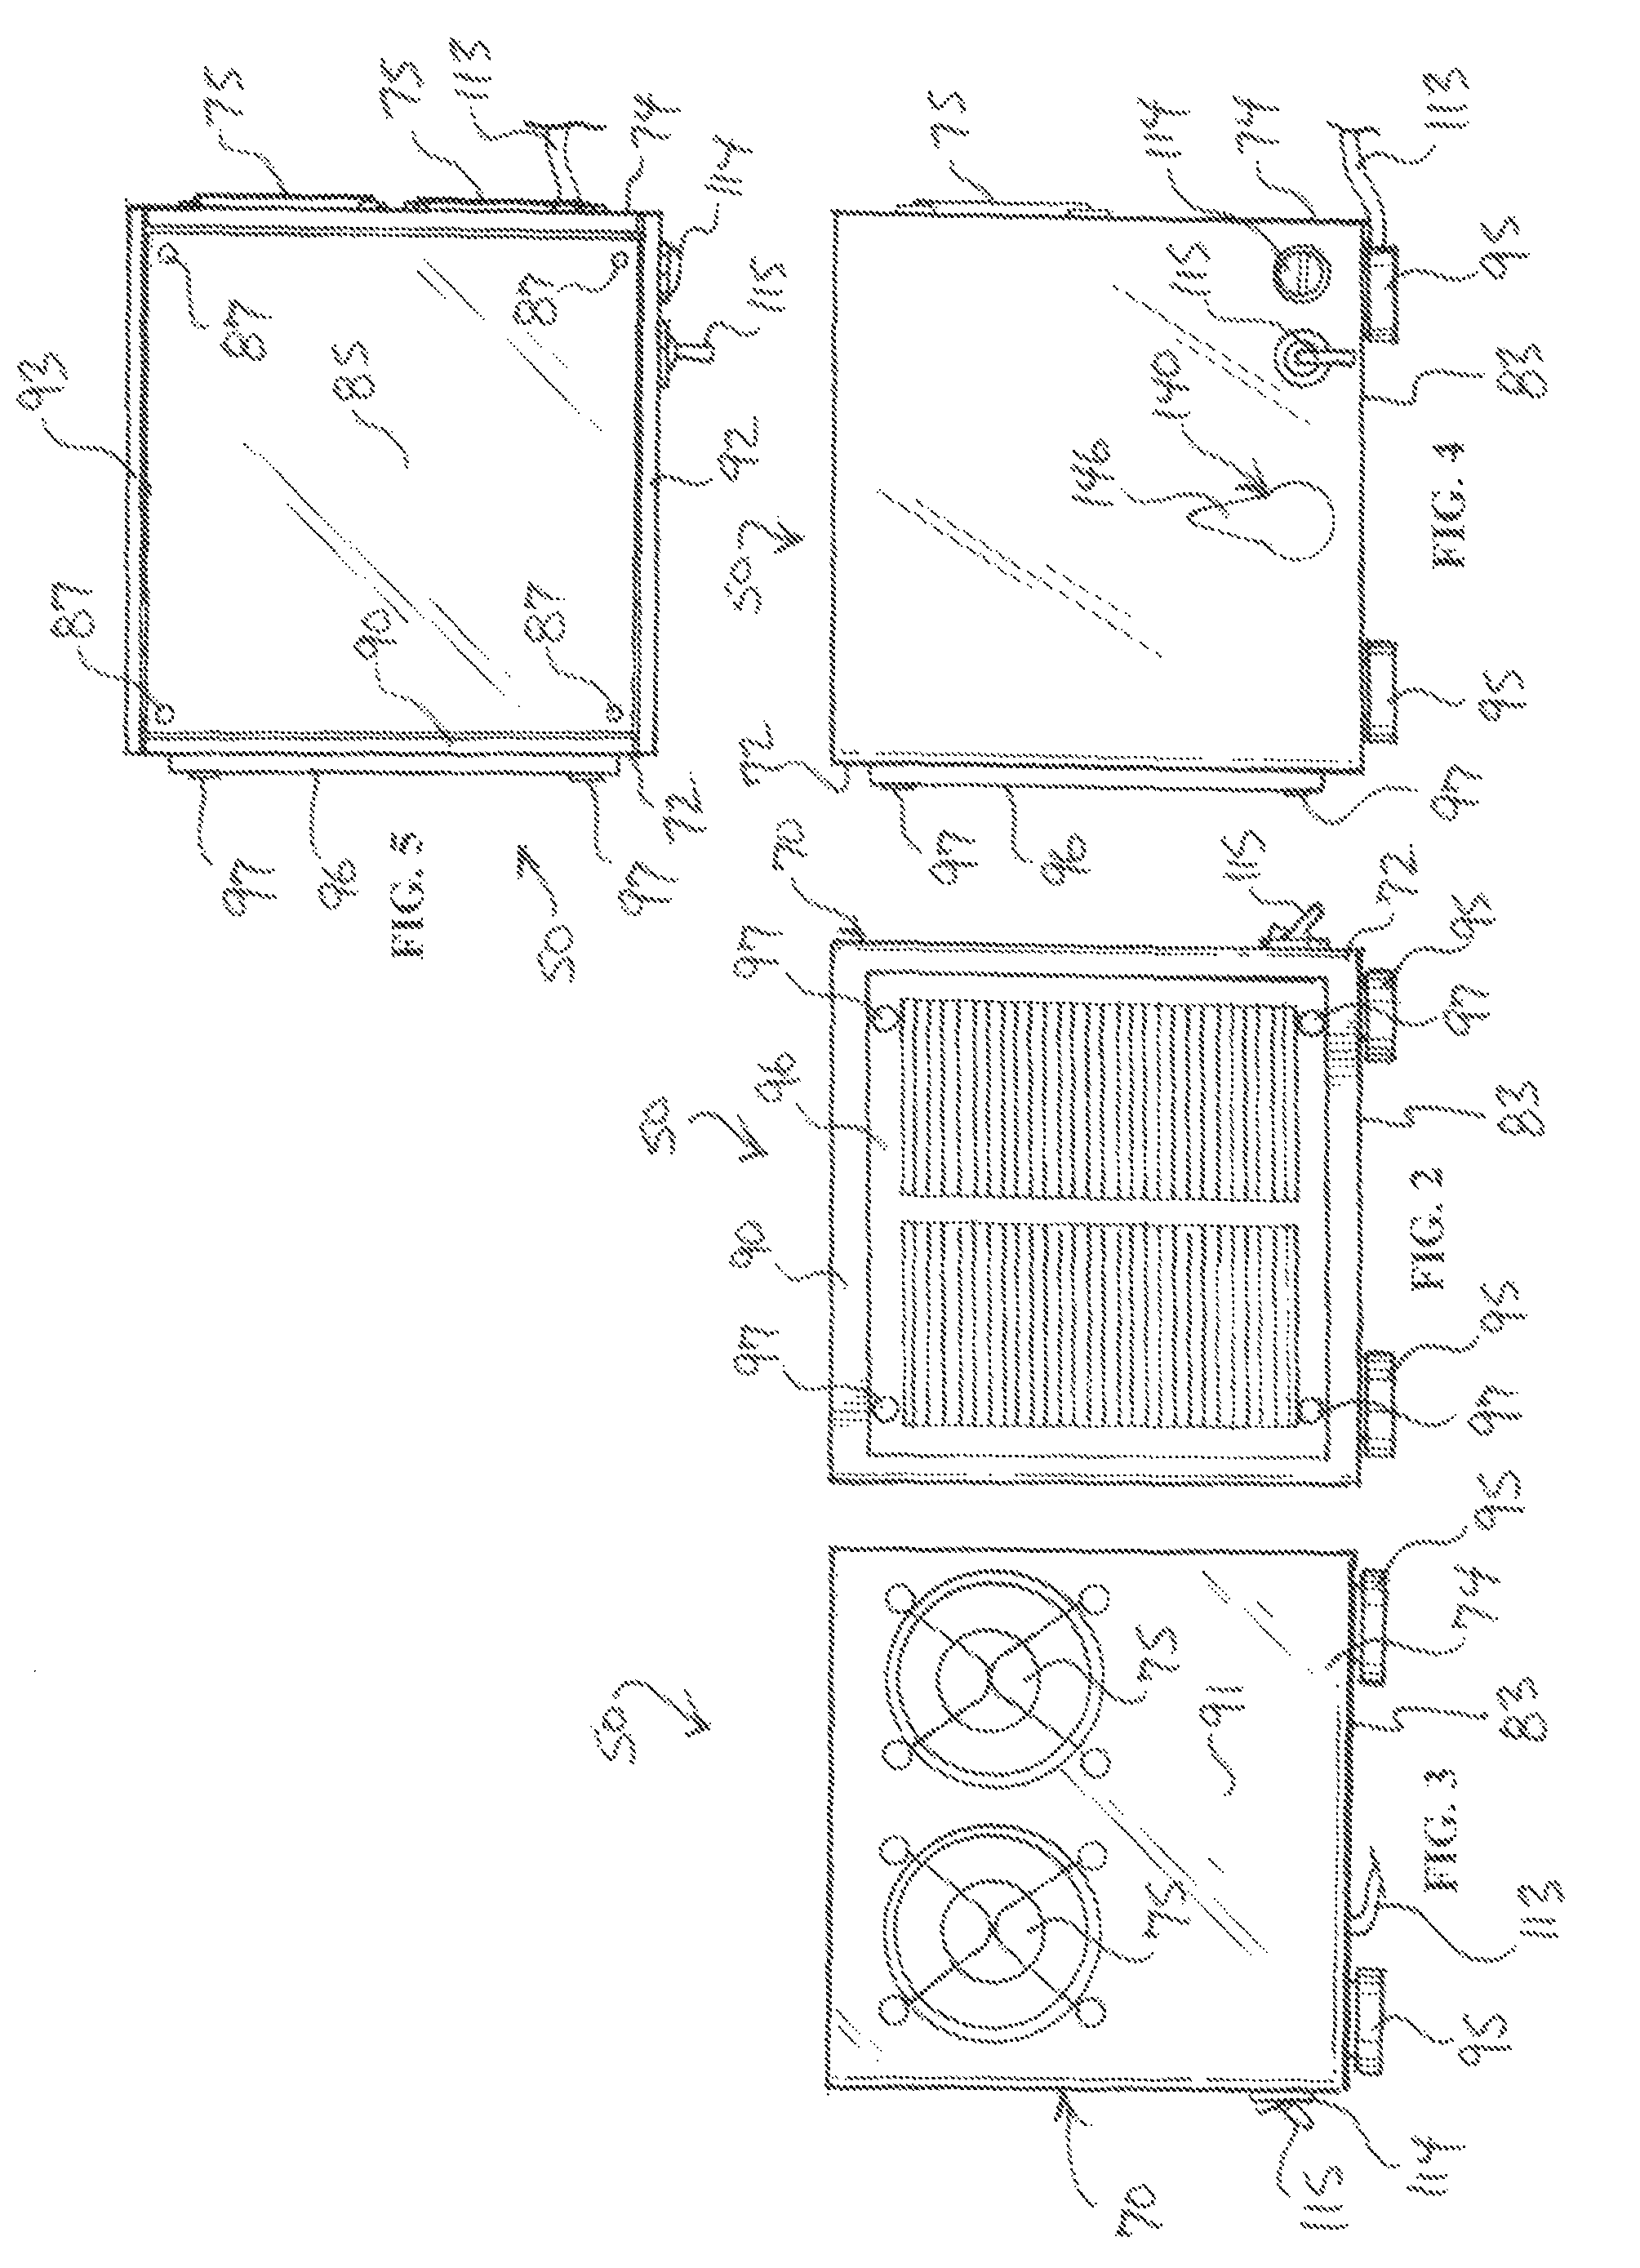 Electrically stimulated air filter apparatus